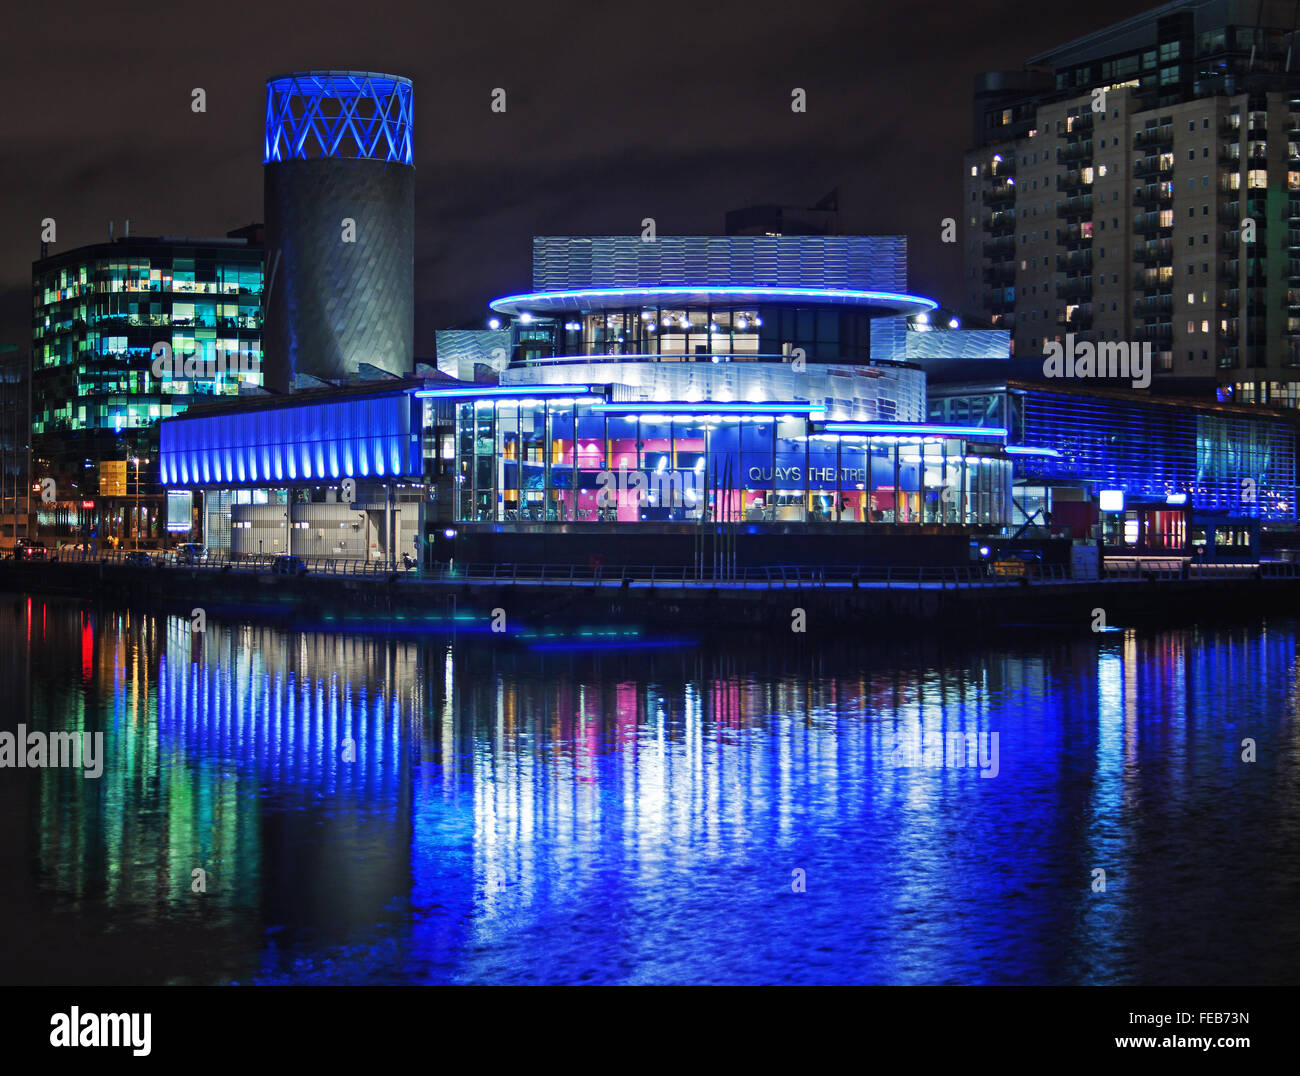 Lowry at night. The Lowry Theatre and Gallery at Salford Quays, viewed across the waterway Stock Photo